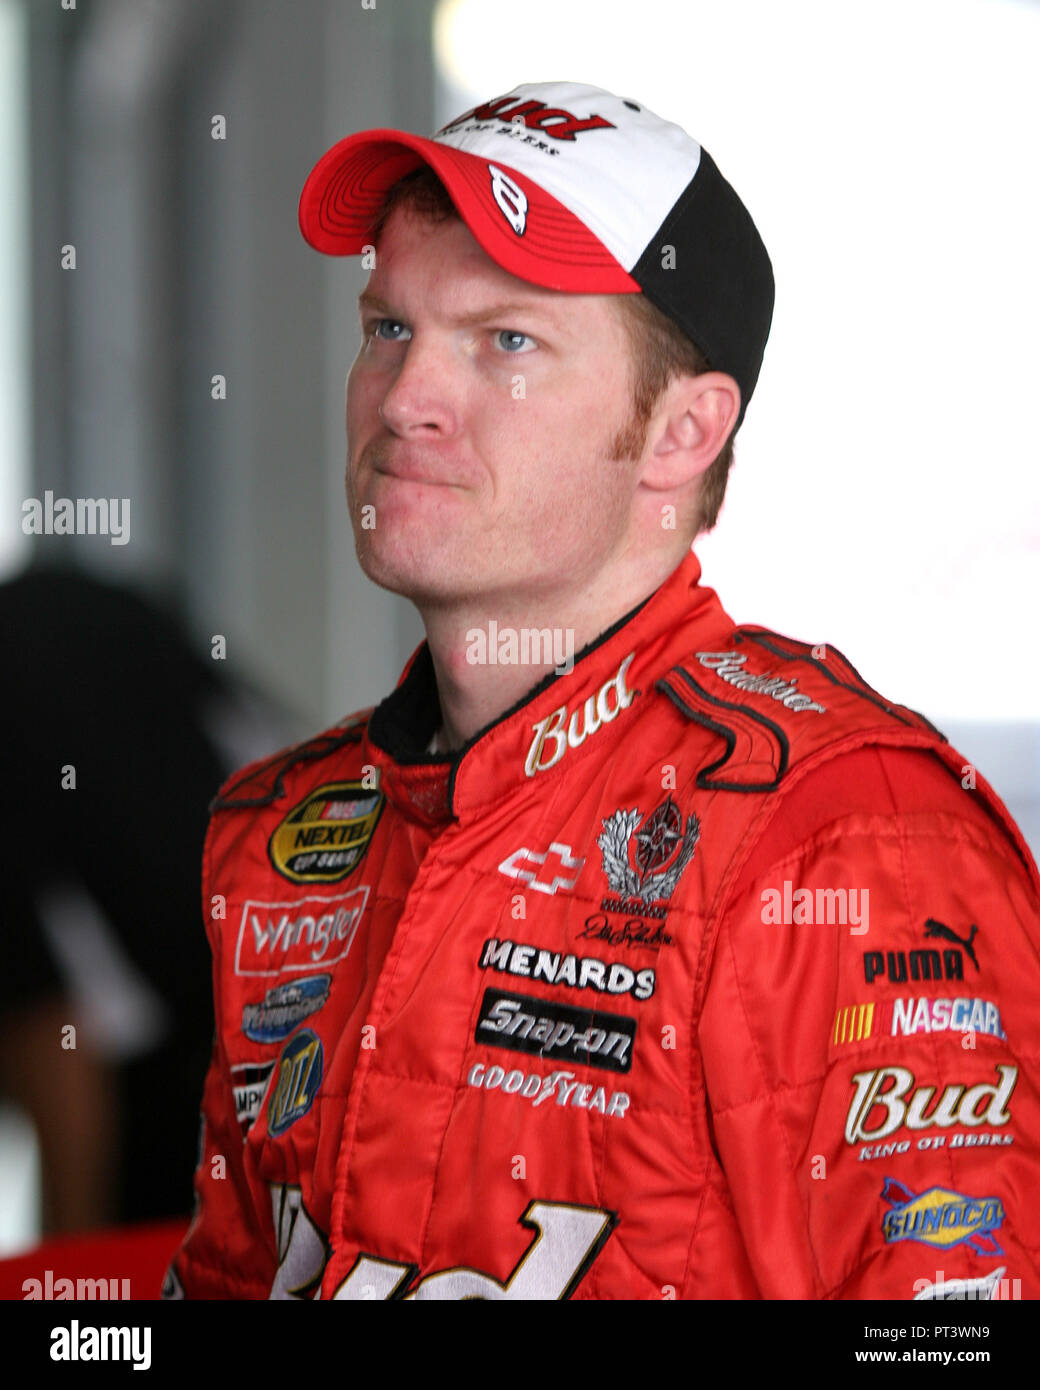 Dale Earnhardt Jr participates in a NASCAR Nextel Cup test session at Homestead Miami Speedway in Homestead, Florida on October 17, 2006. Stock Photo